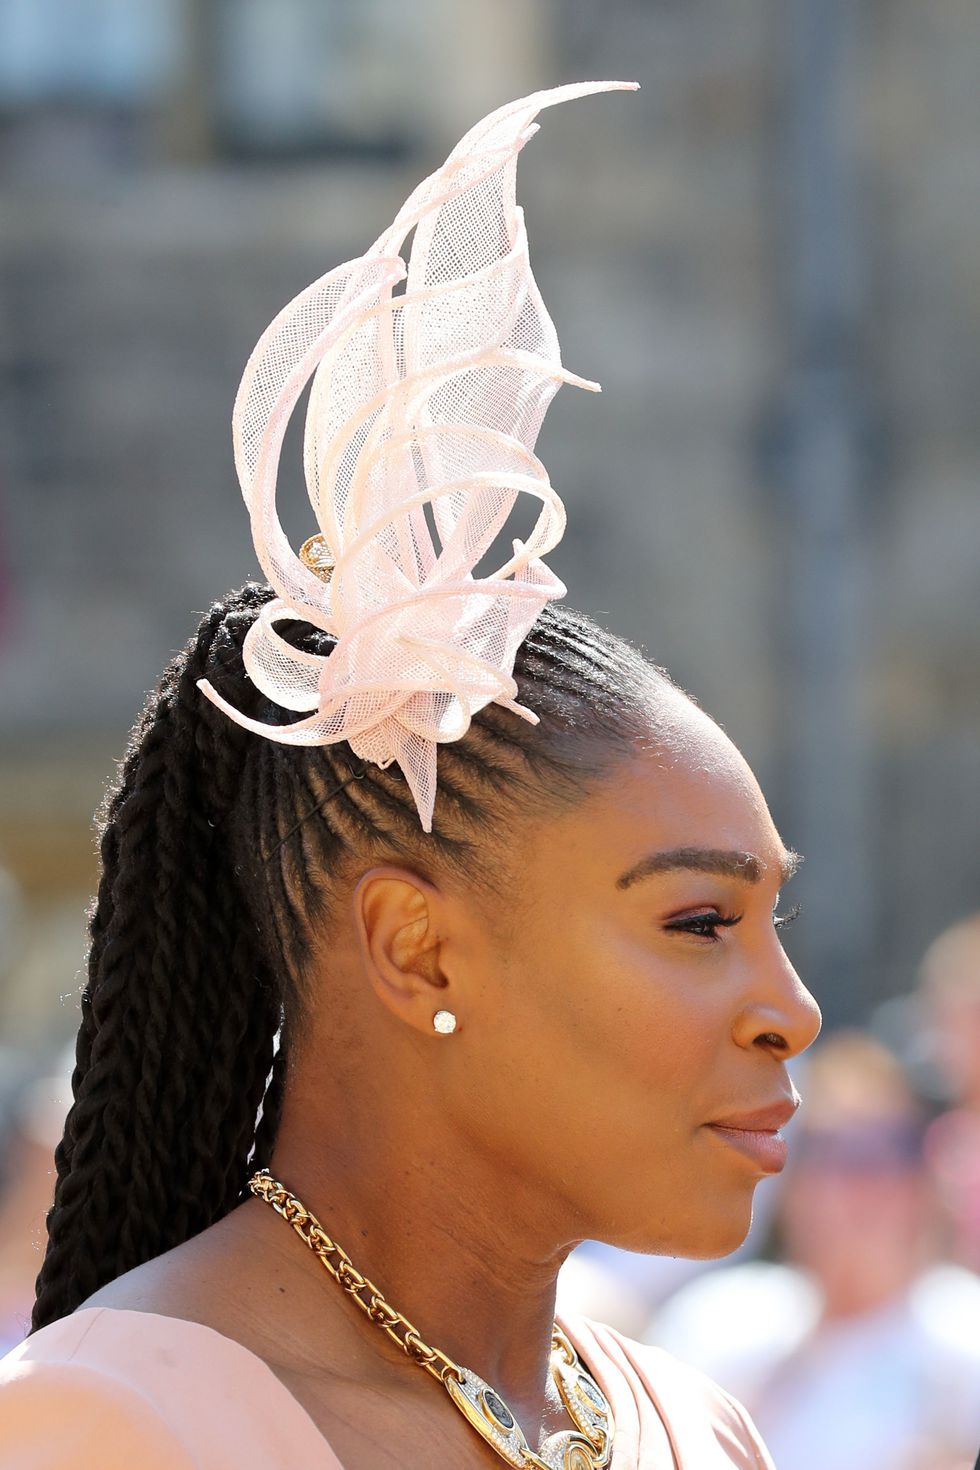 10 Most Memorable Royal Wedding Hats You Want To Add to Your Wardrobe